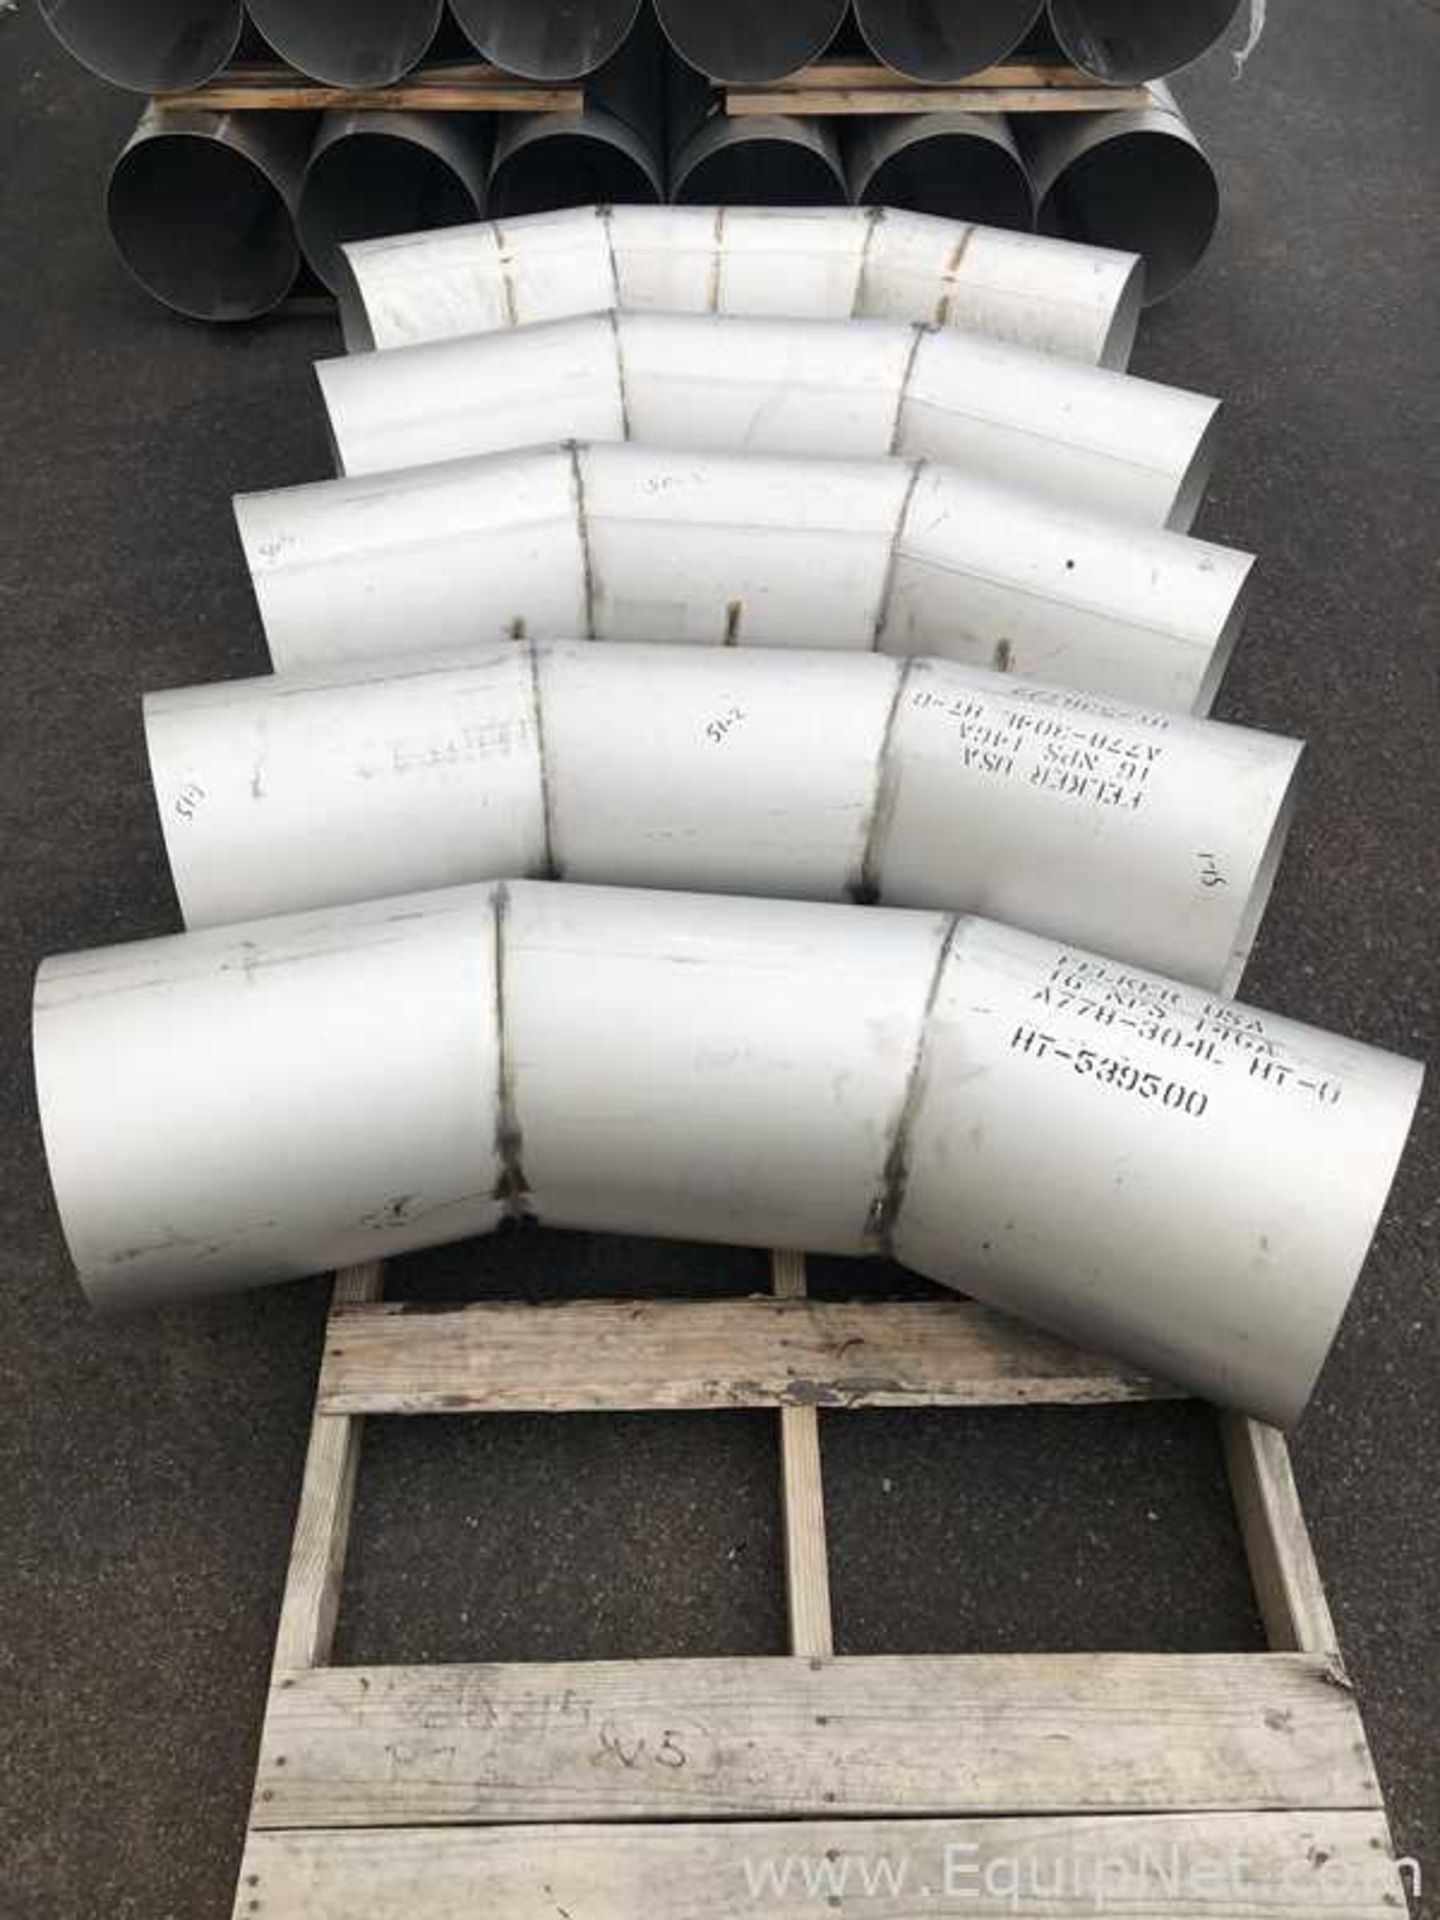 Lot Of Approx 15 Stainless Steel 304L Piping 16in diam X 150in Length Sections And Semi Elbows - Image 11 of 12